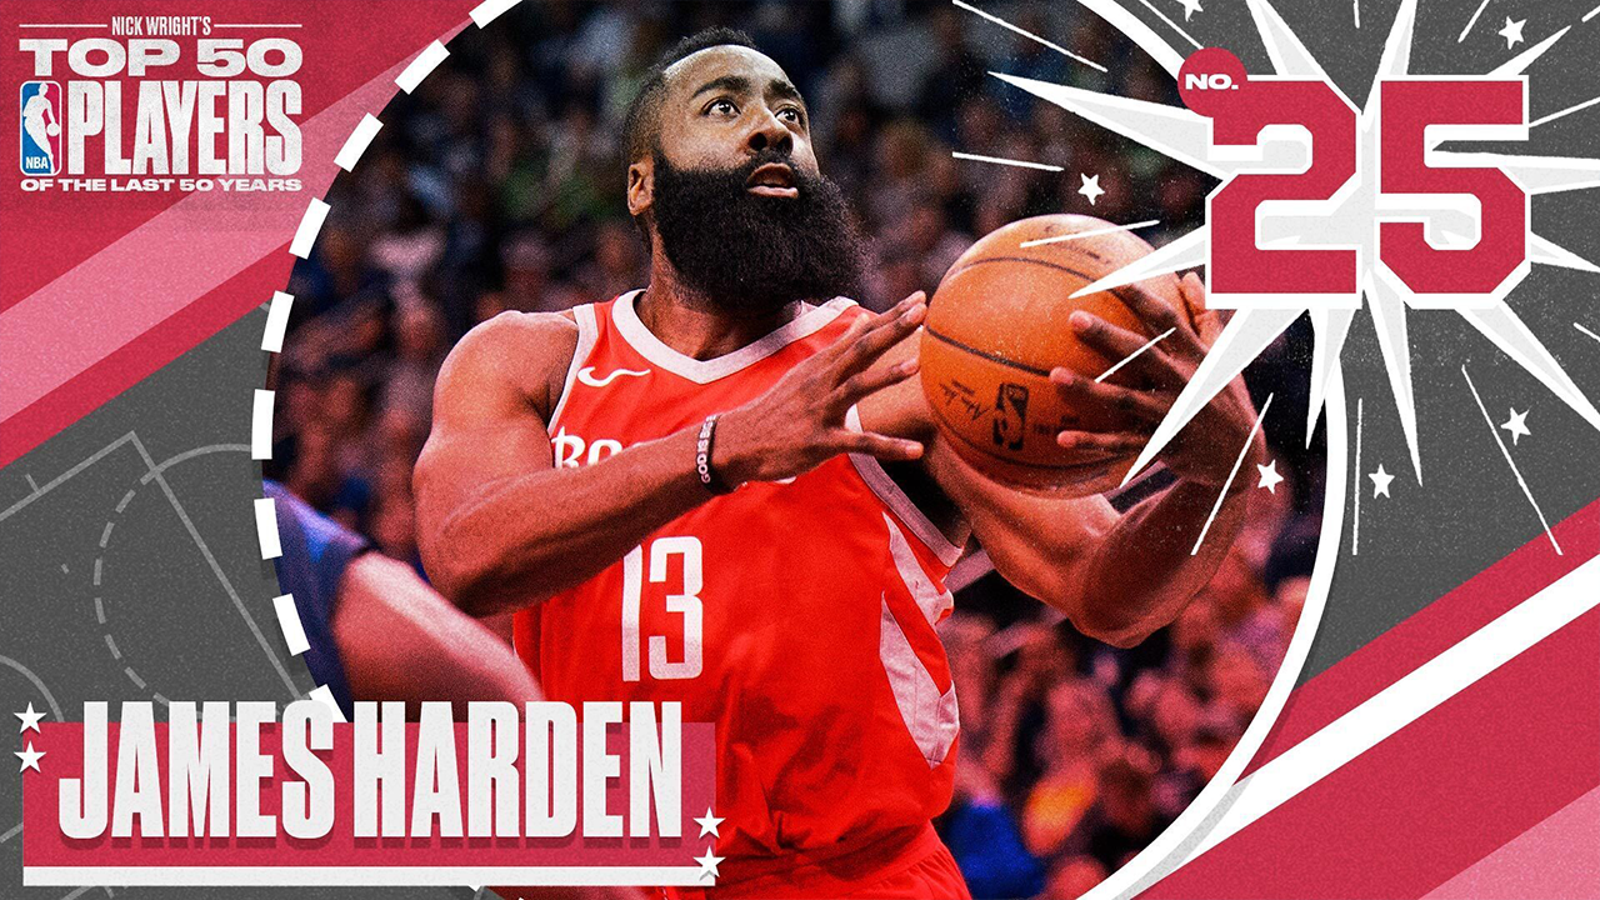 James Harden is No. 25 on Nick Wright's Top 50 NBA Players of the Last 50 Years